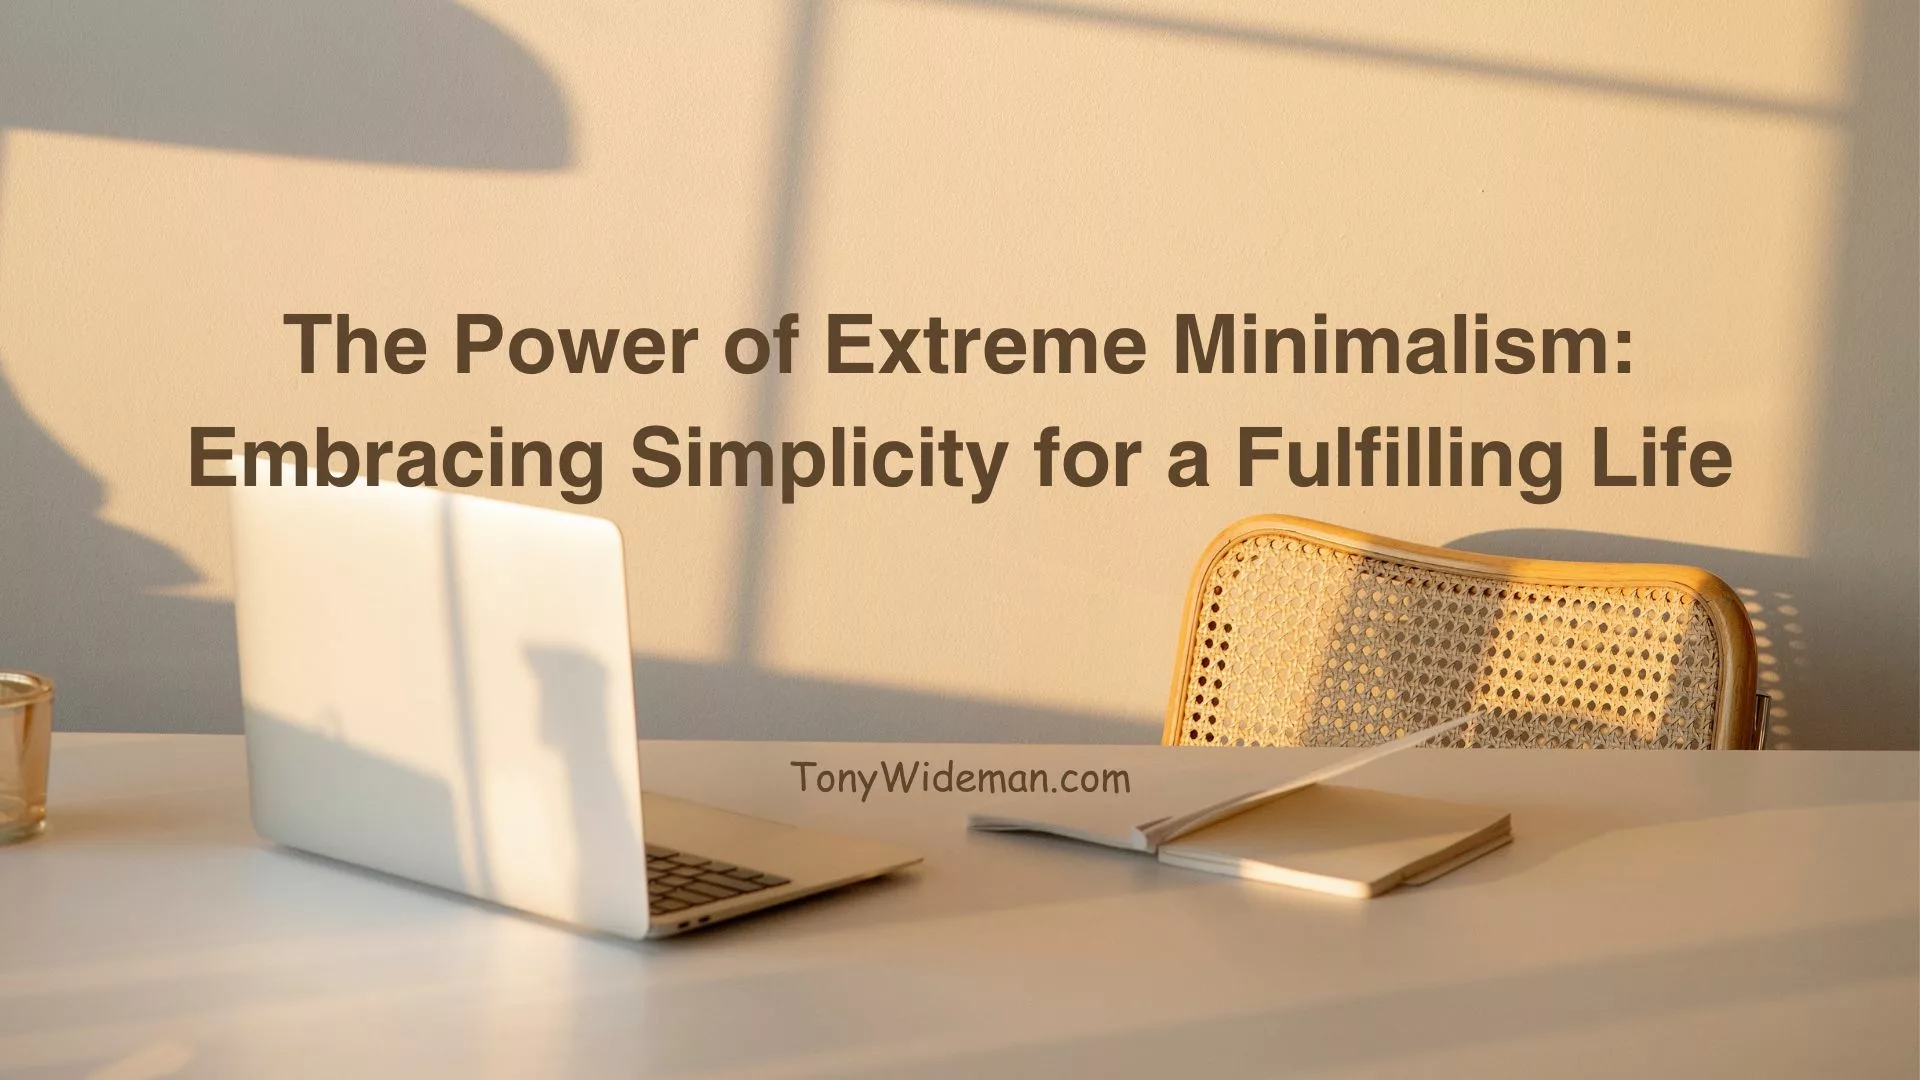 The Power of Extreme Minimalism: Embracing Simplicity for a Fulfilling Life